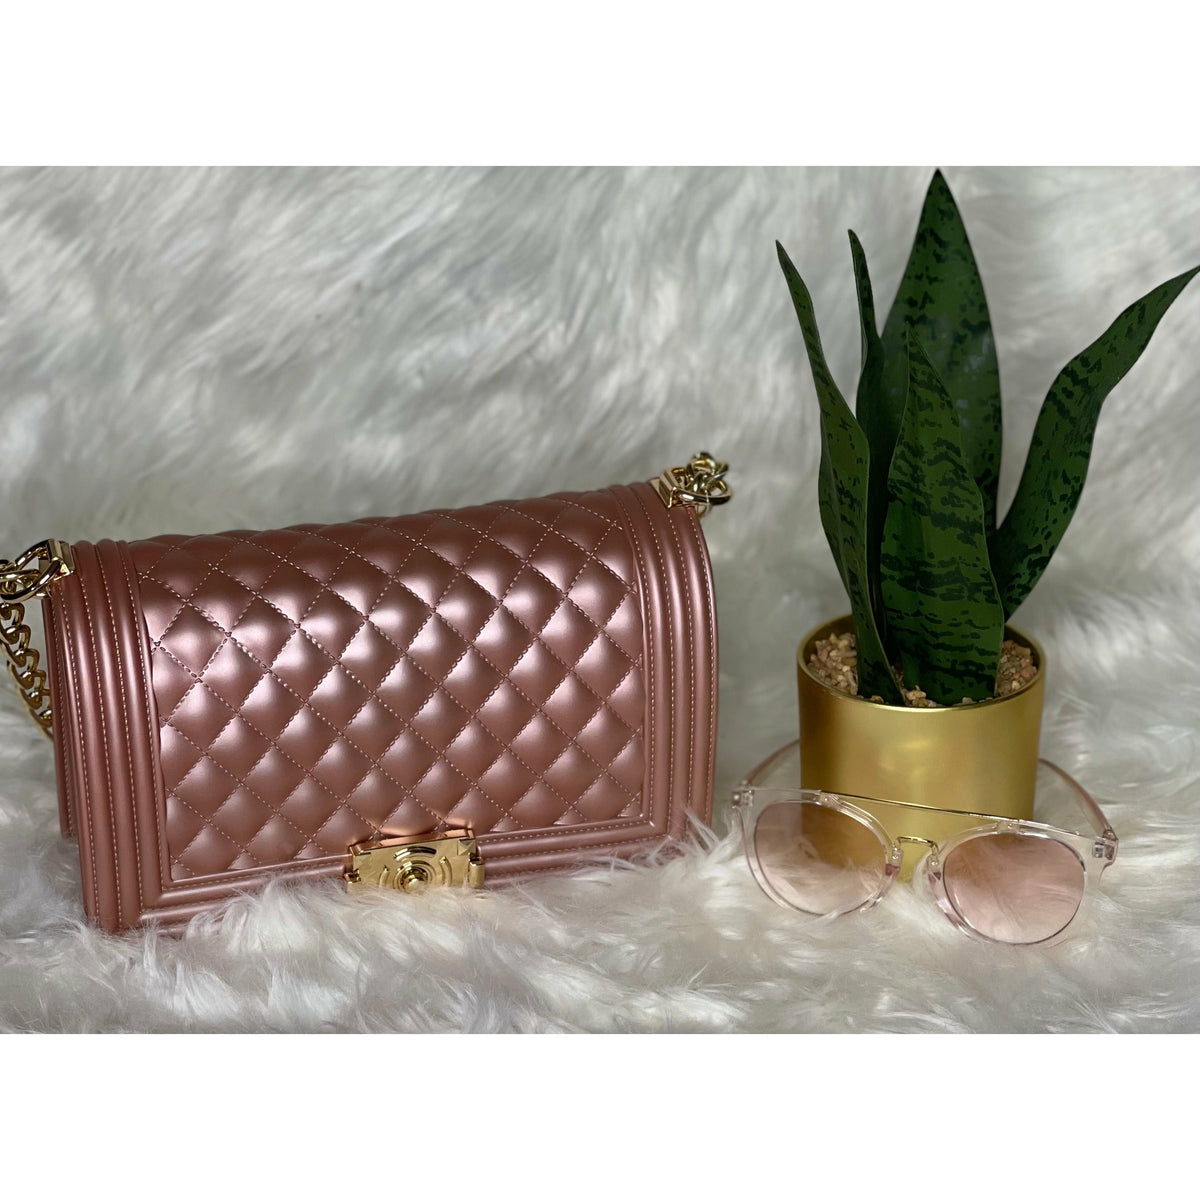 Jelly Jelly Bag by hiquality fashion boutique